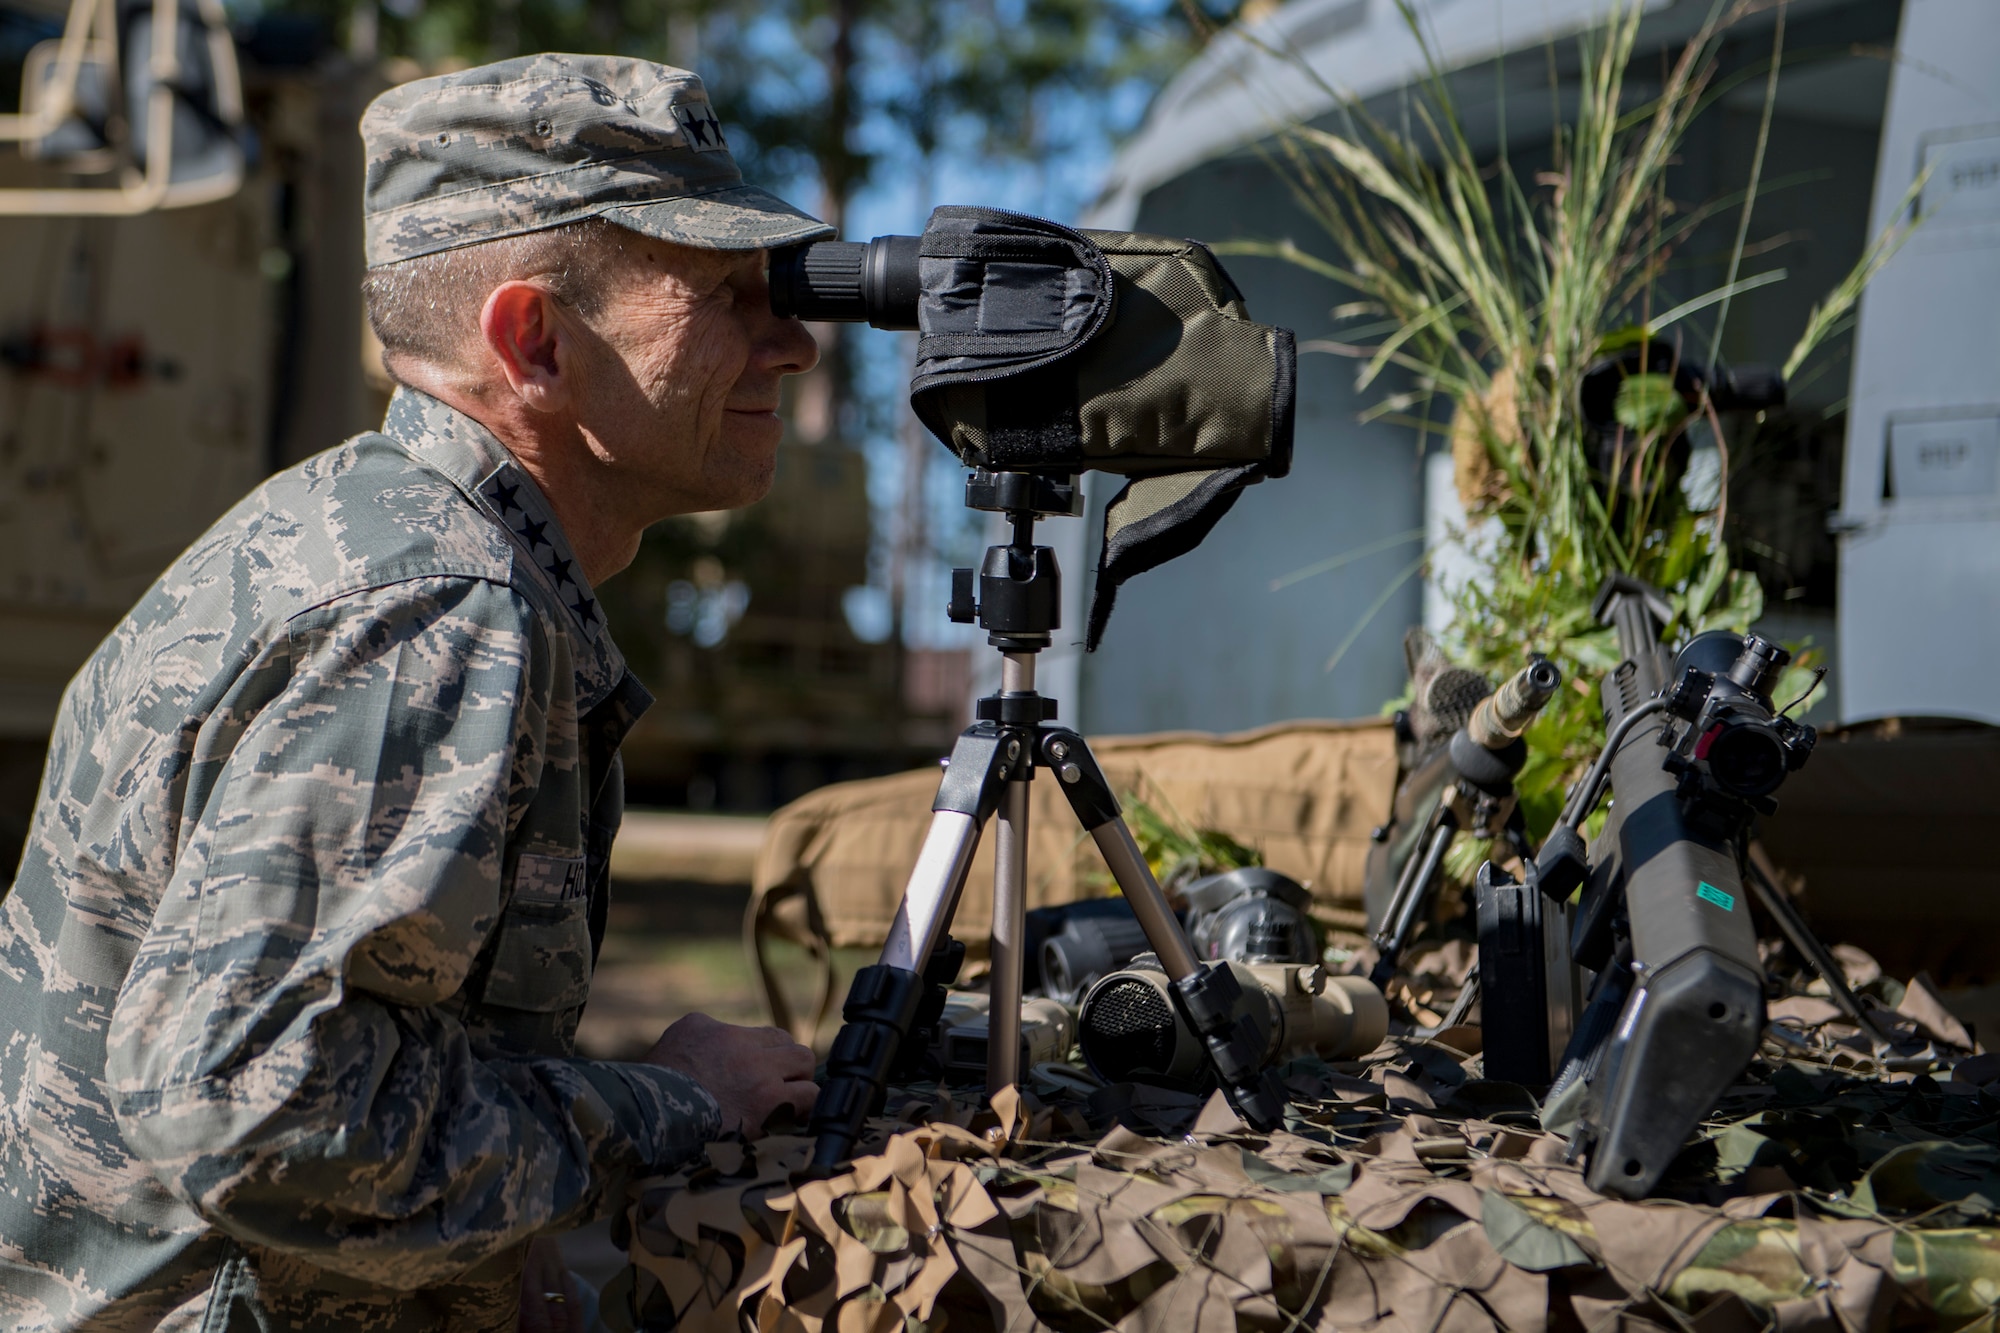 Gen. Mike Holmes, commander of Air Combat Command, looks through a spotter’s scope during a capabilities demonstration by the 820th Base Defense Group, Oct. 18, 2017, at Moody Air Force Base, Ga.